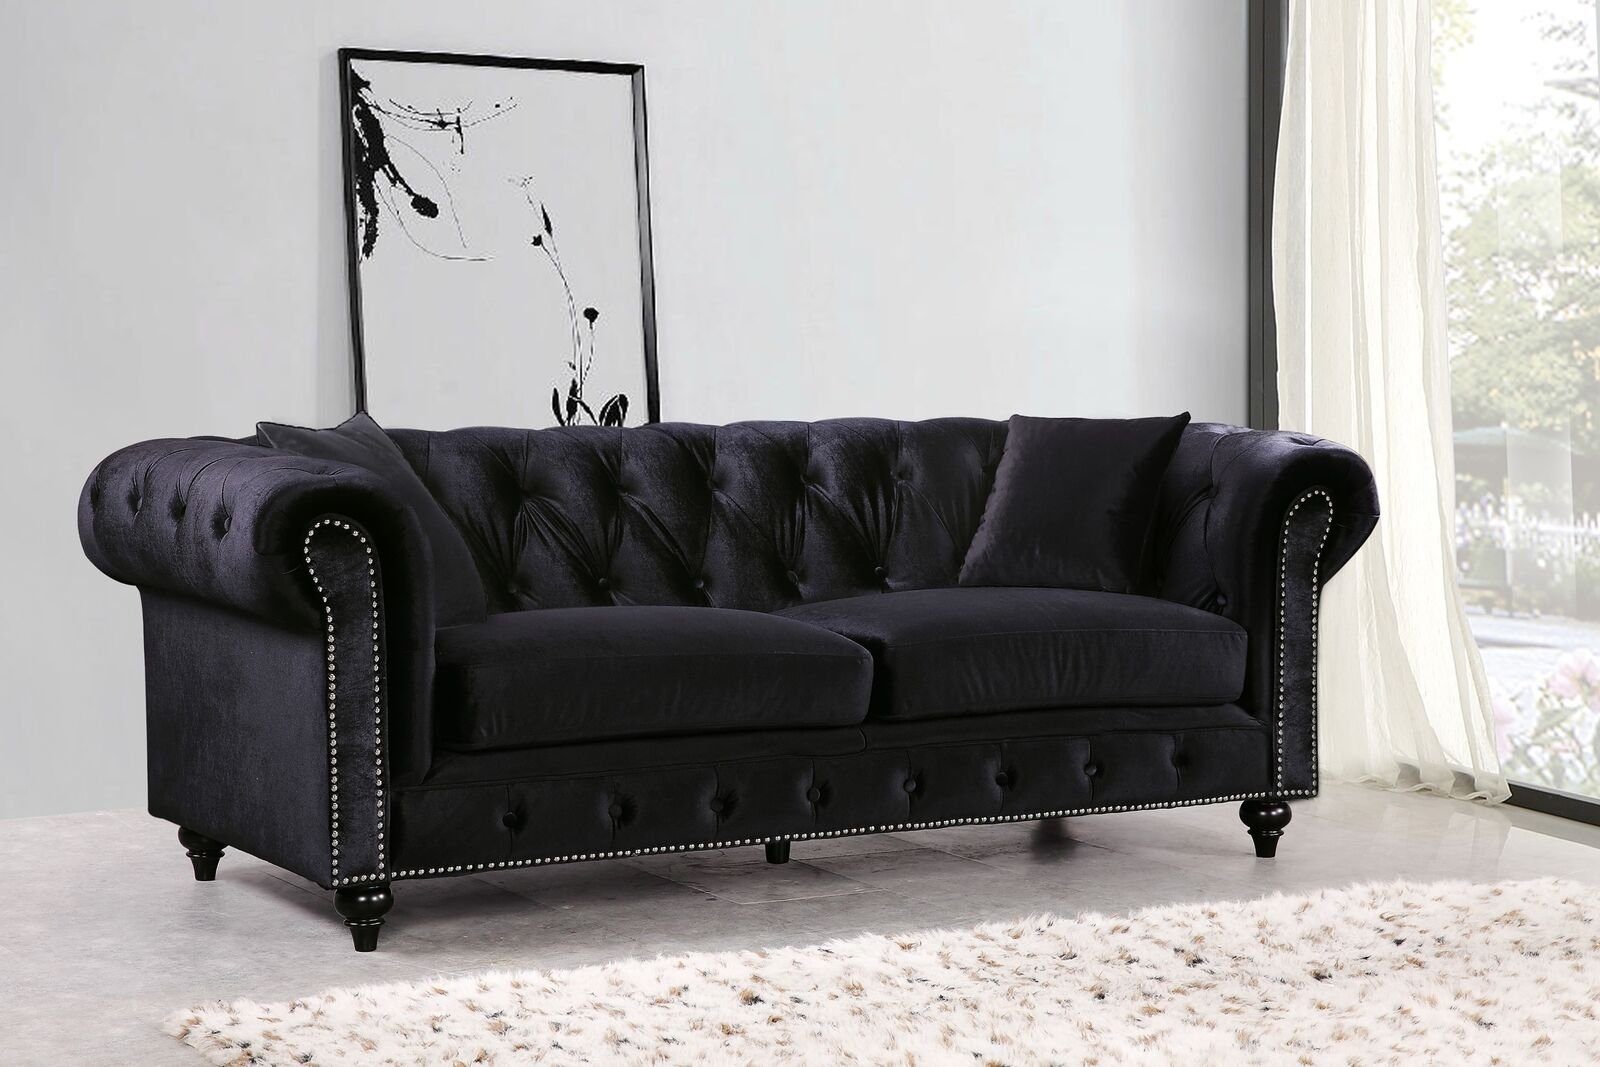 Design Luxus Couch JVmoebel Polster Sofa Chesterfield-Sofa, Chesterfield